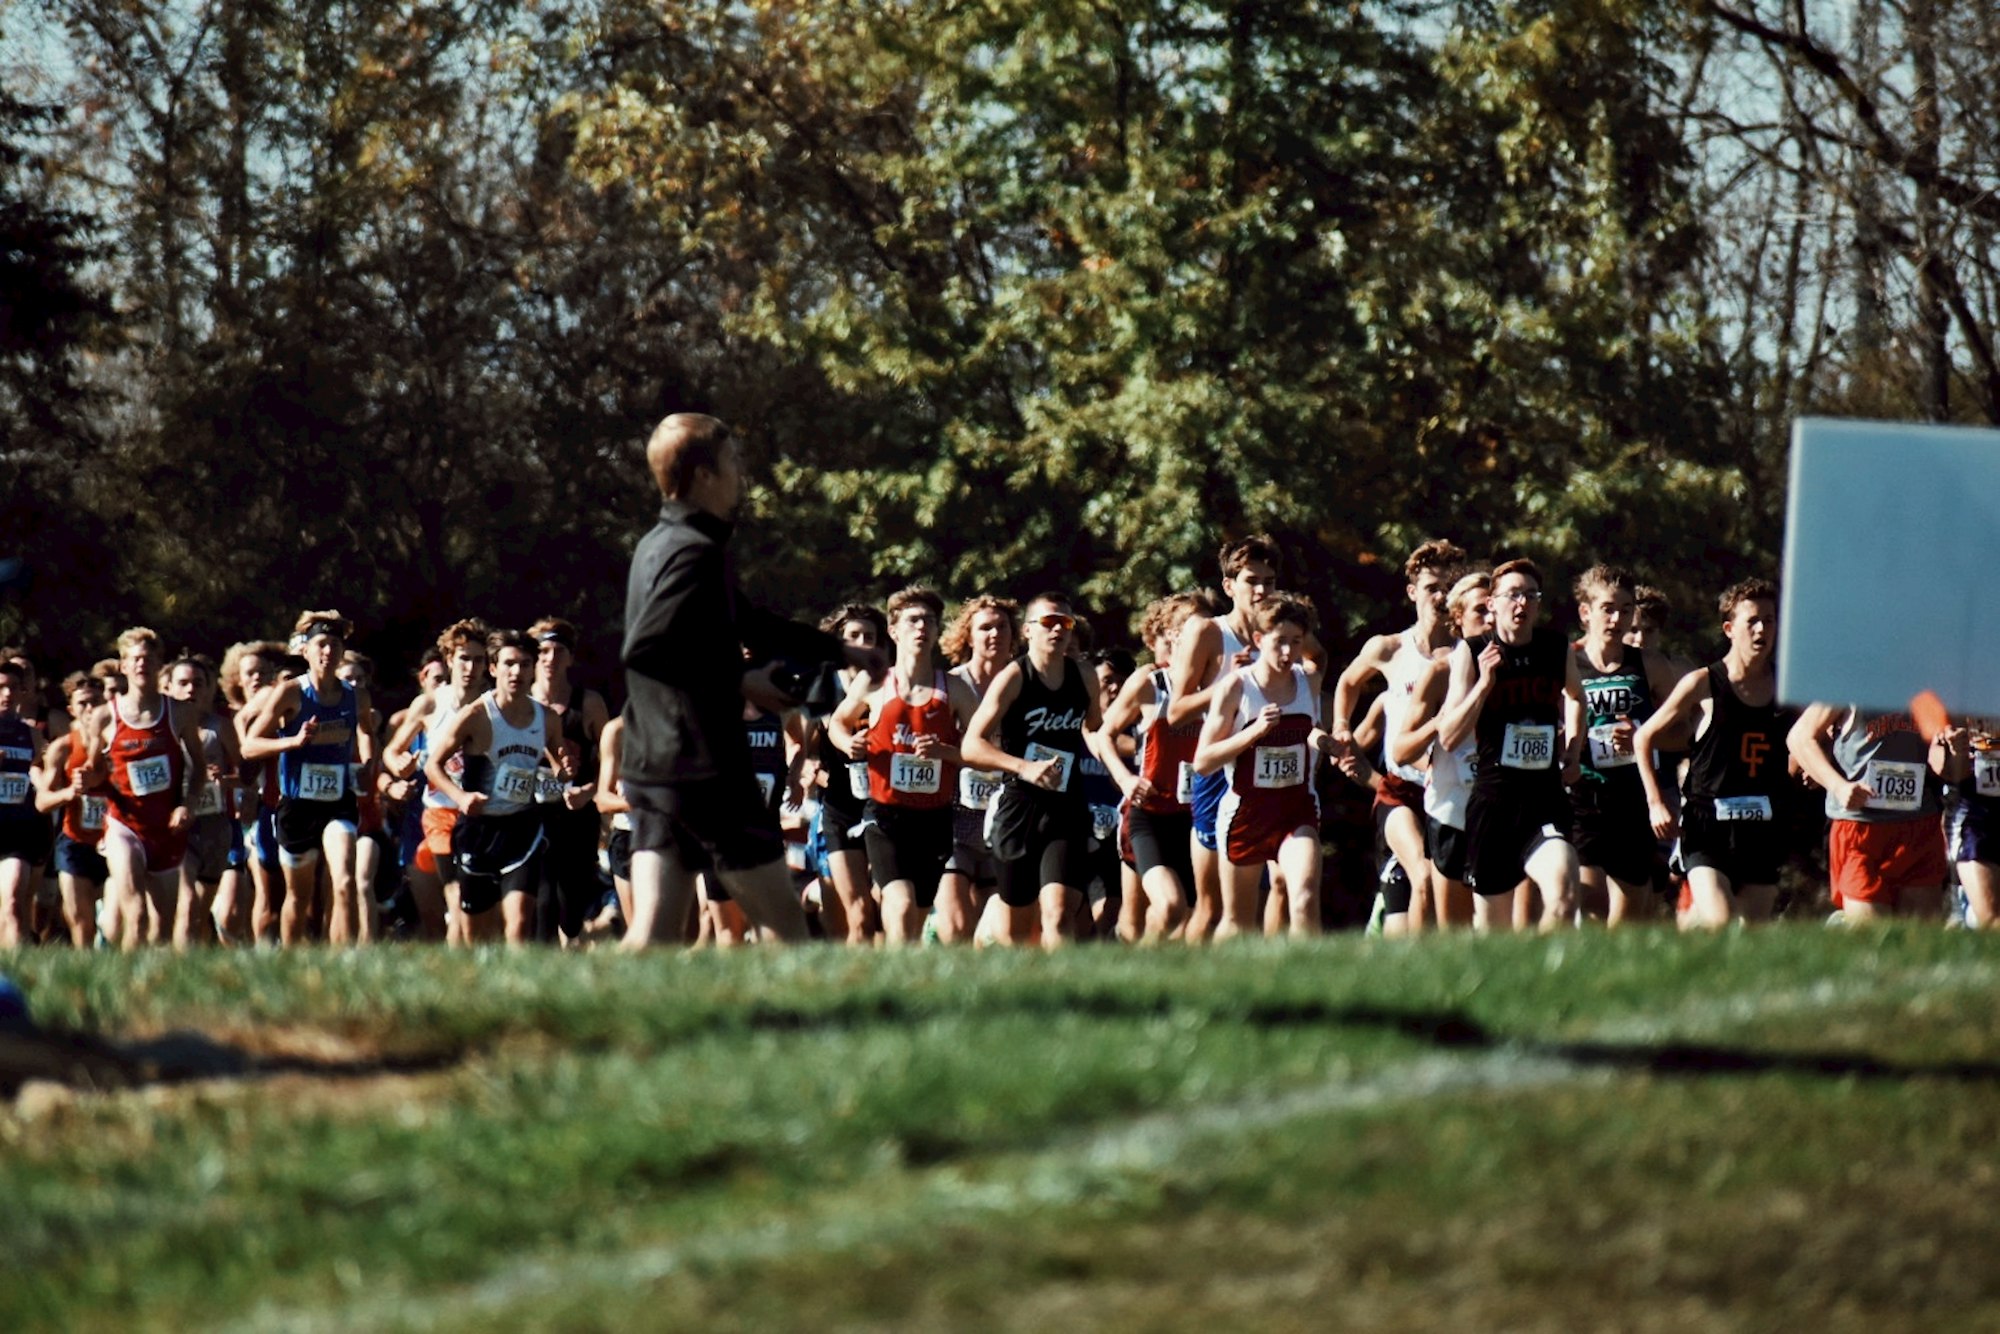 cross country runners competing in an event